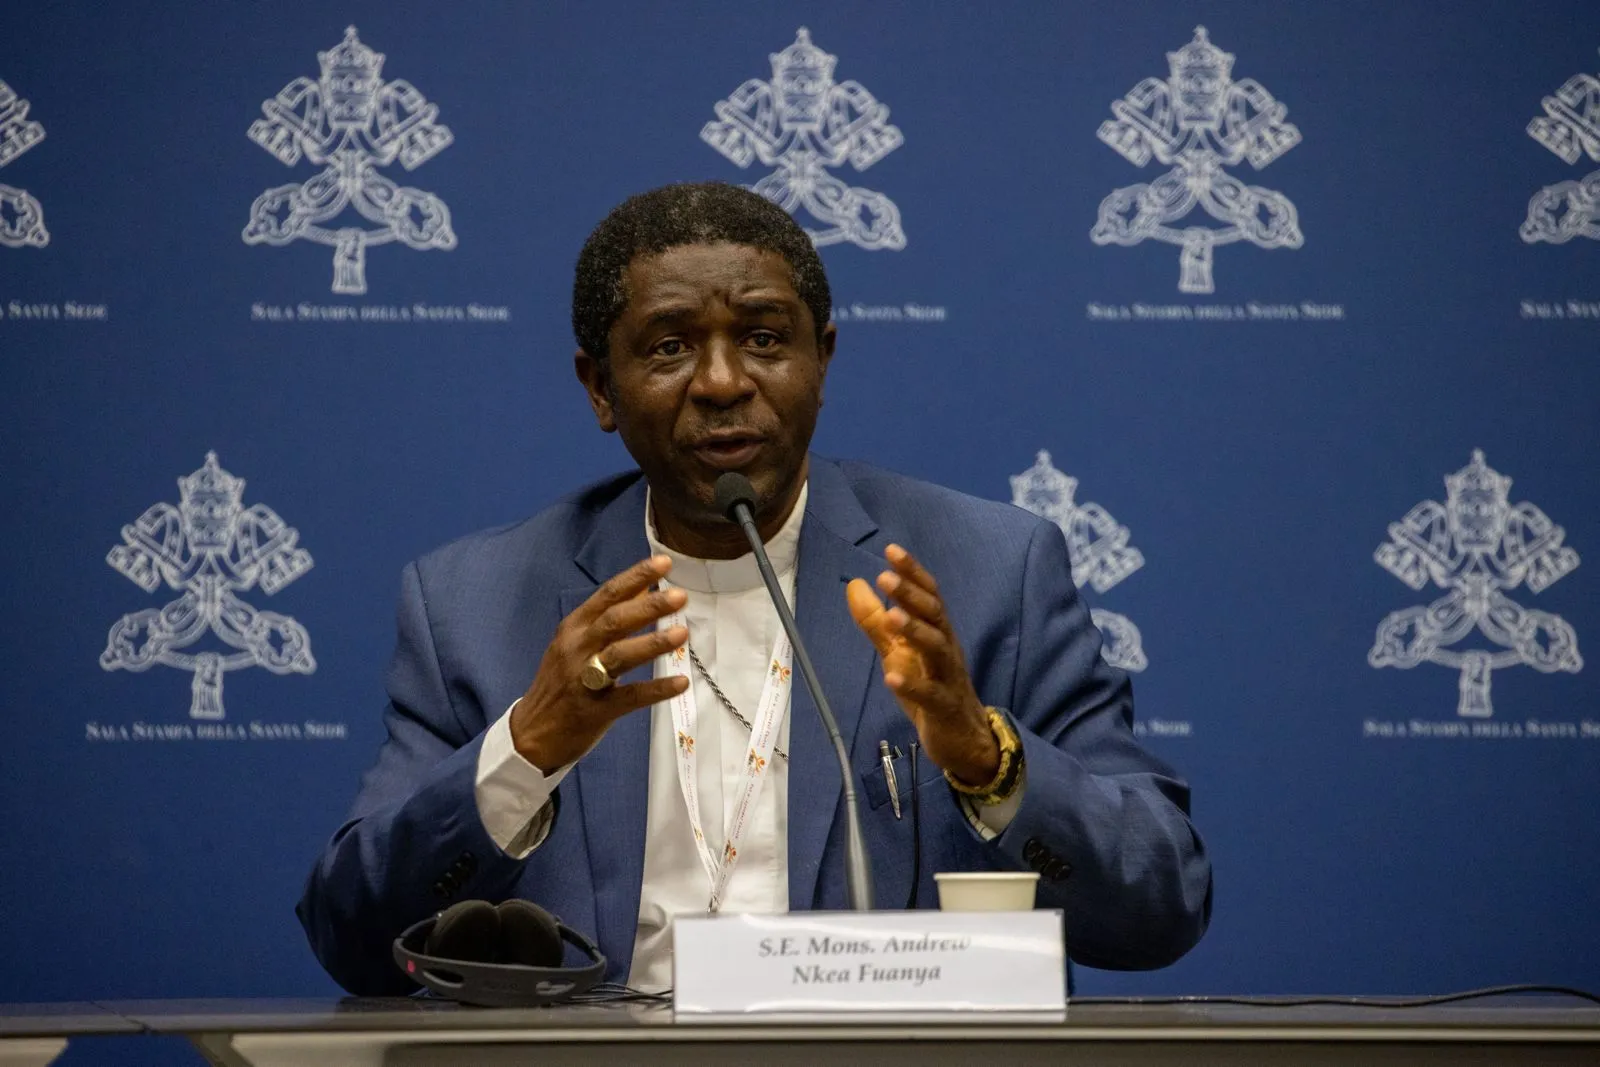 Archbishop Andrew Nkea Fuanya of Bamenda, Cameroon, said at an Oct. 12 briefing that the Synod on Synodality is “a chance for the voice of Africa to be heard.”?w=200&h=150